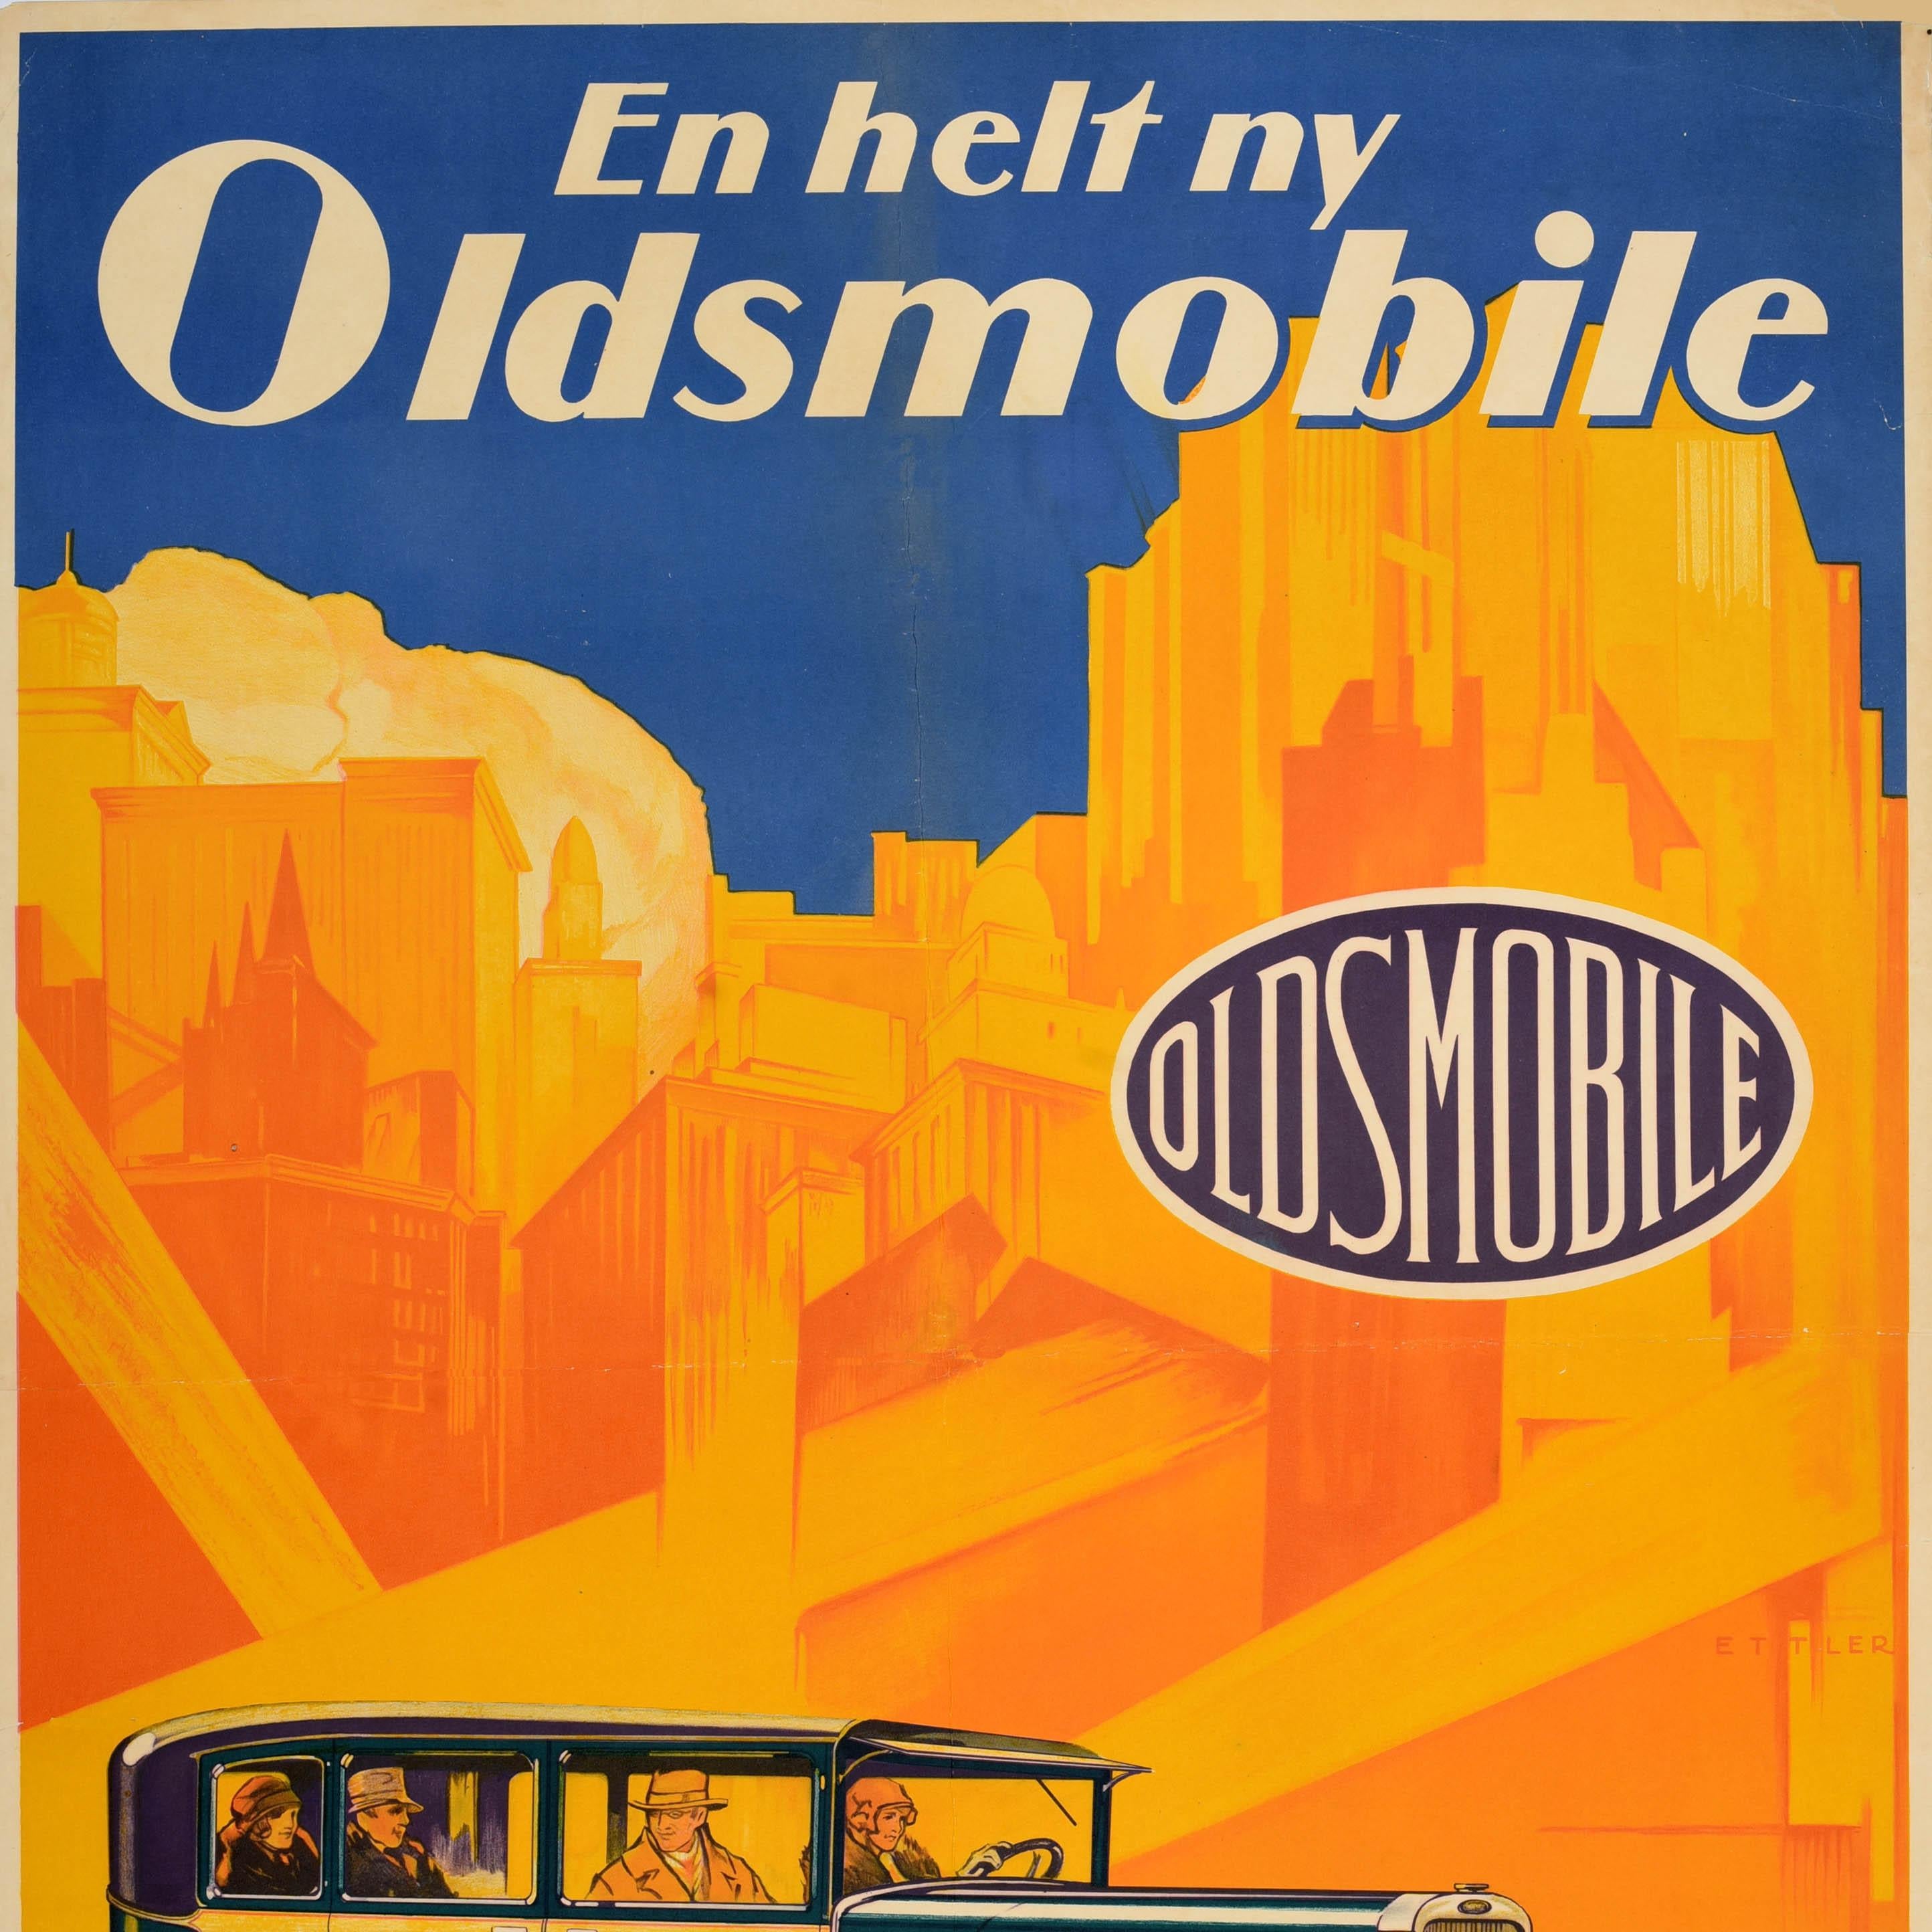 Original vintage car advertising poster - En Helt Ny Oldsmobile General Motors Fabrikat / A Brand New Oldsmobile - featuring a colourful Art Deco design depicting two couples in an elegant new classic car driving at speed with a striking background